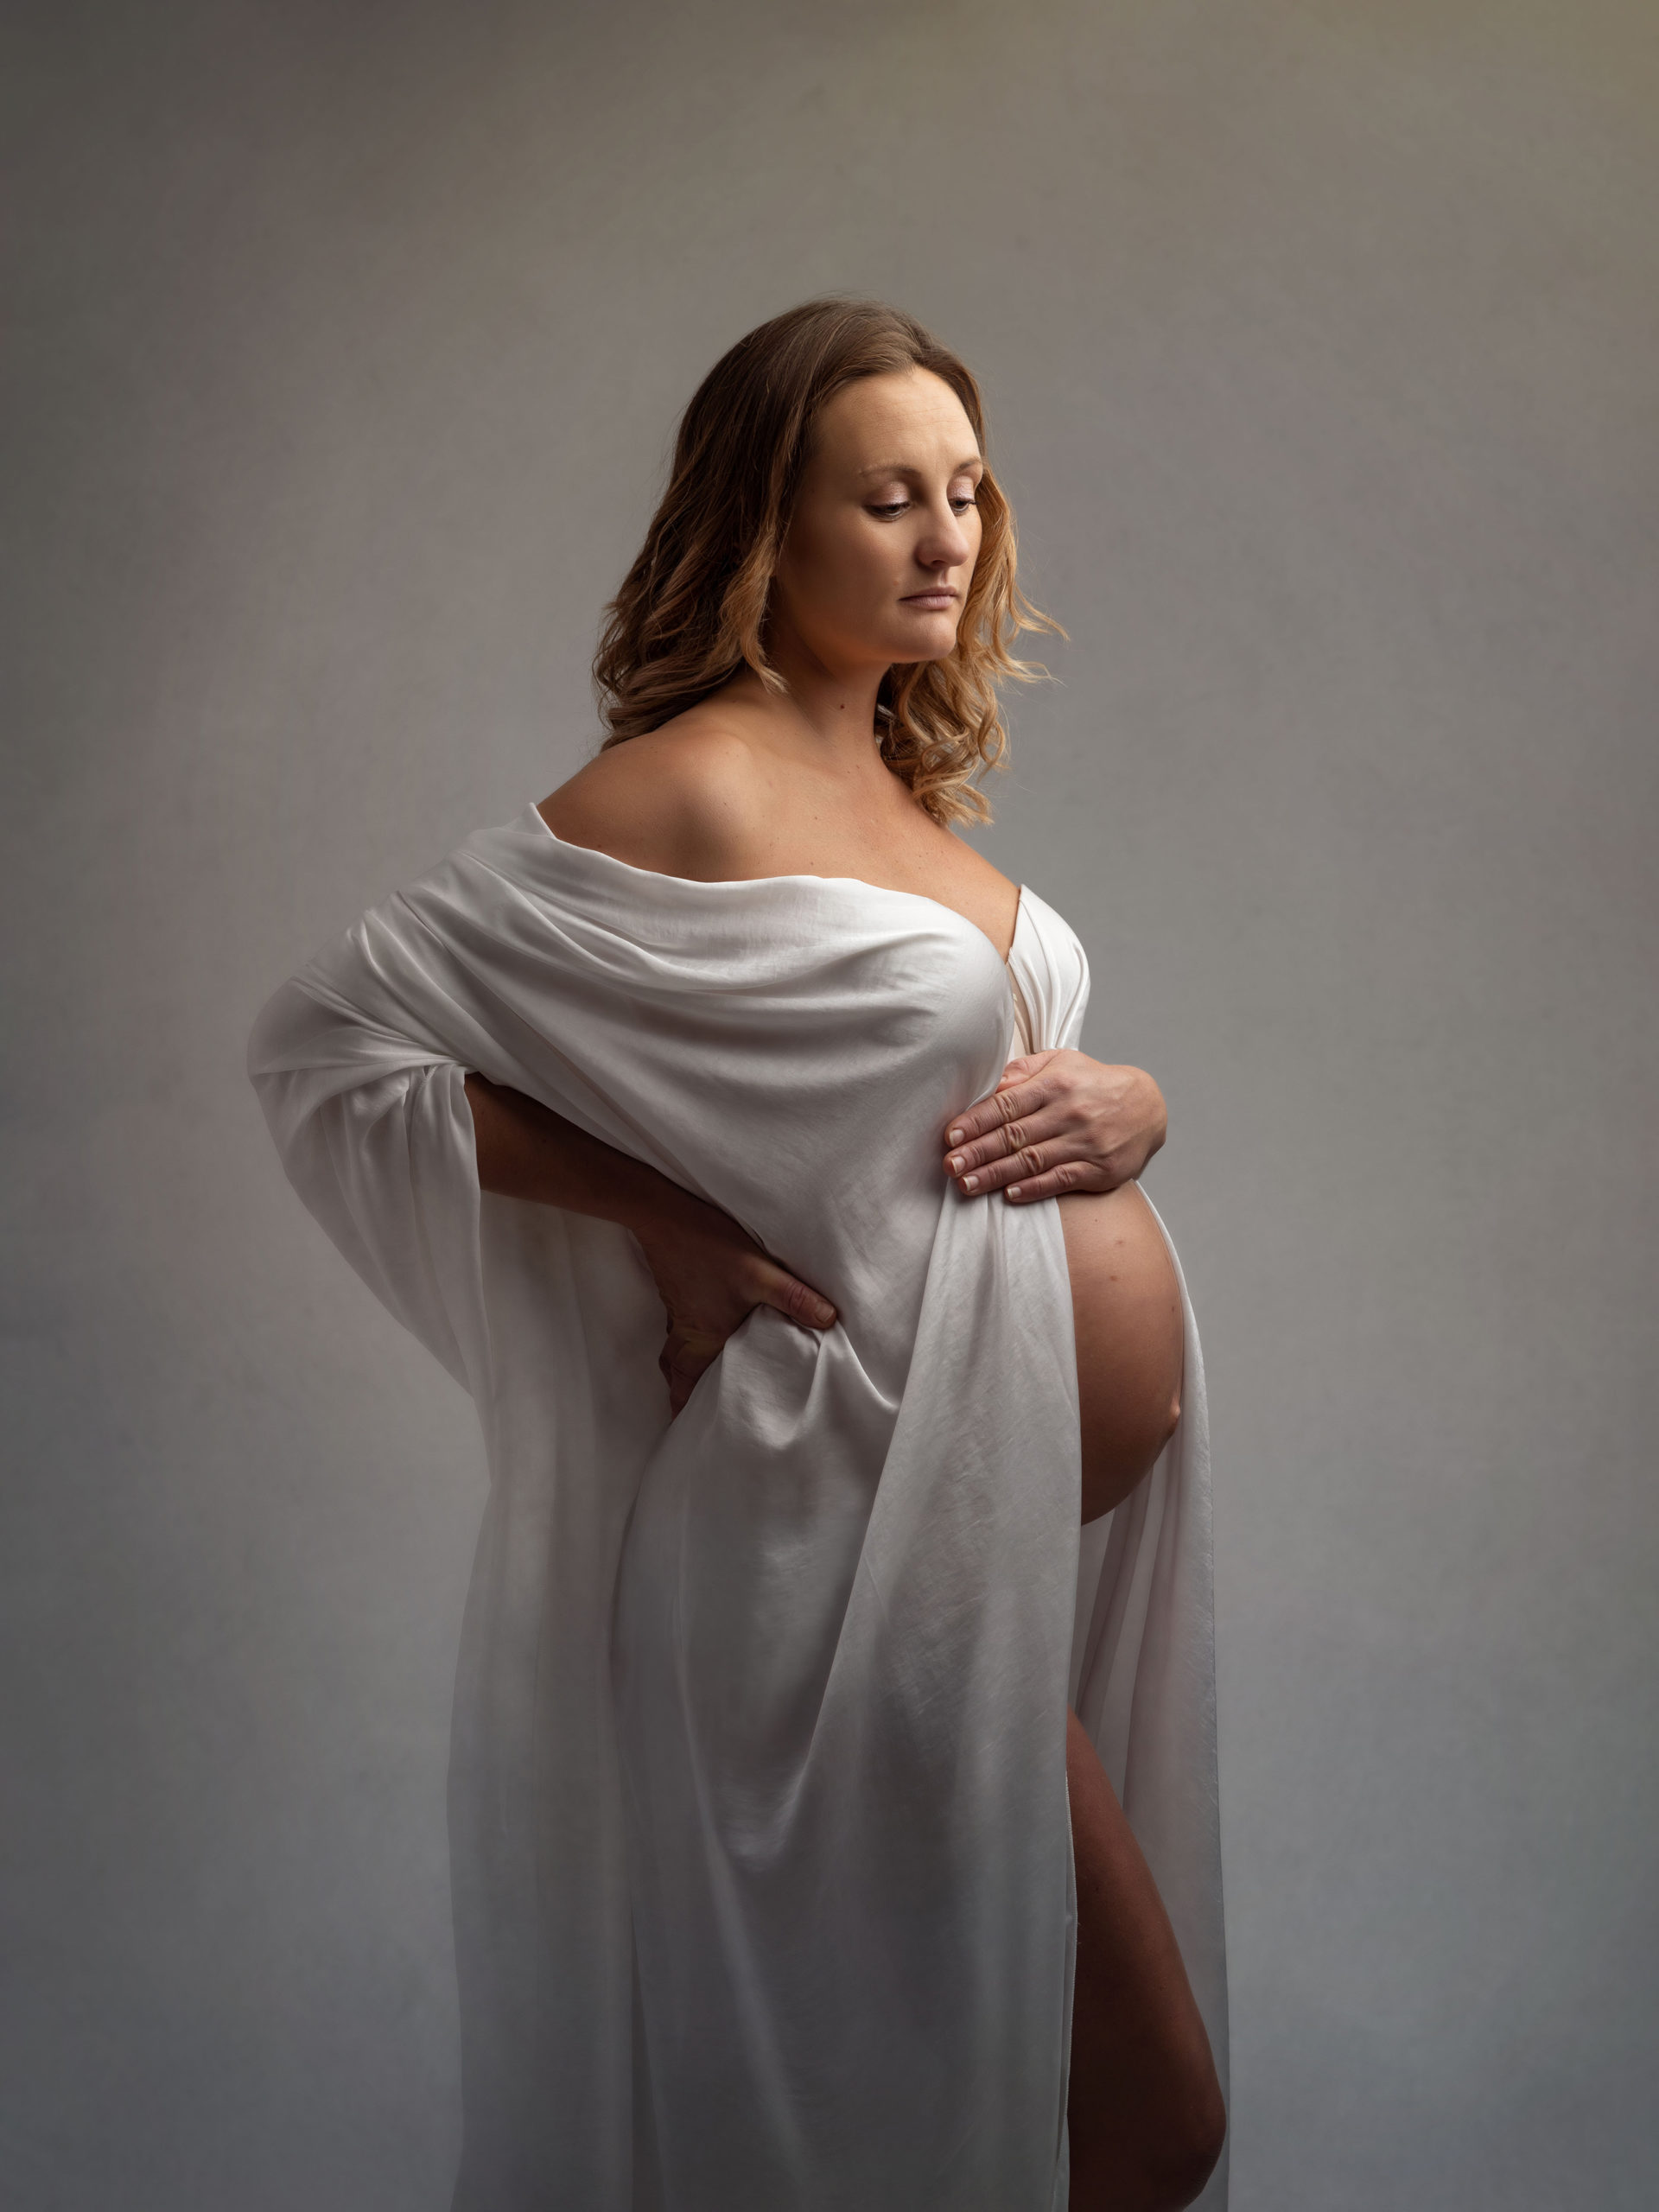 Pregnant woman draped in white material poses for Maternity Shoot with Alison McKenny Photography